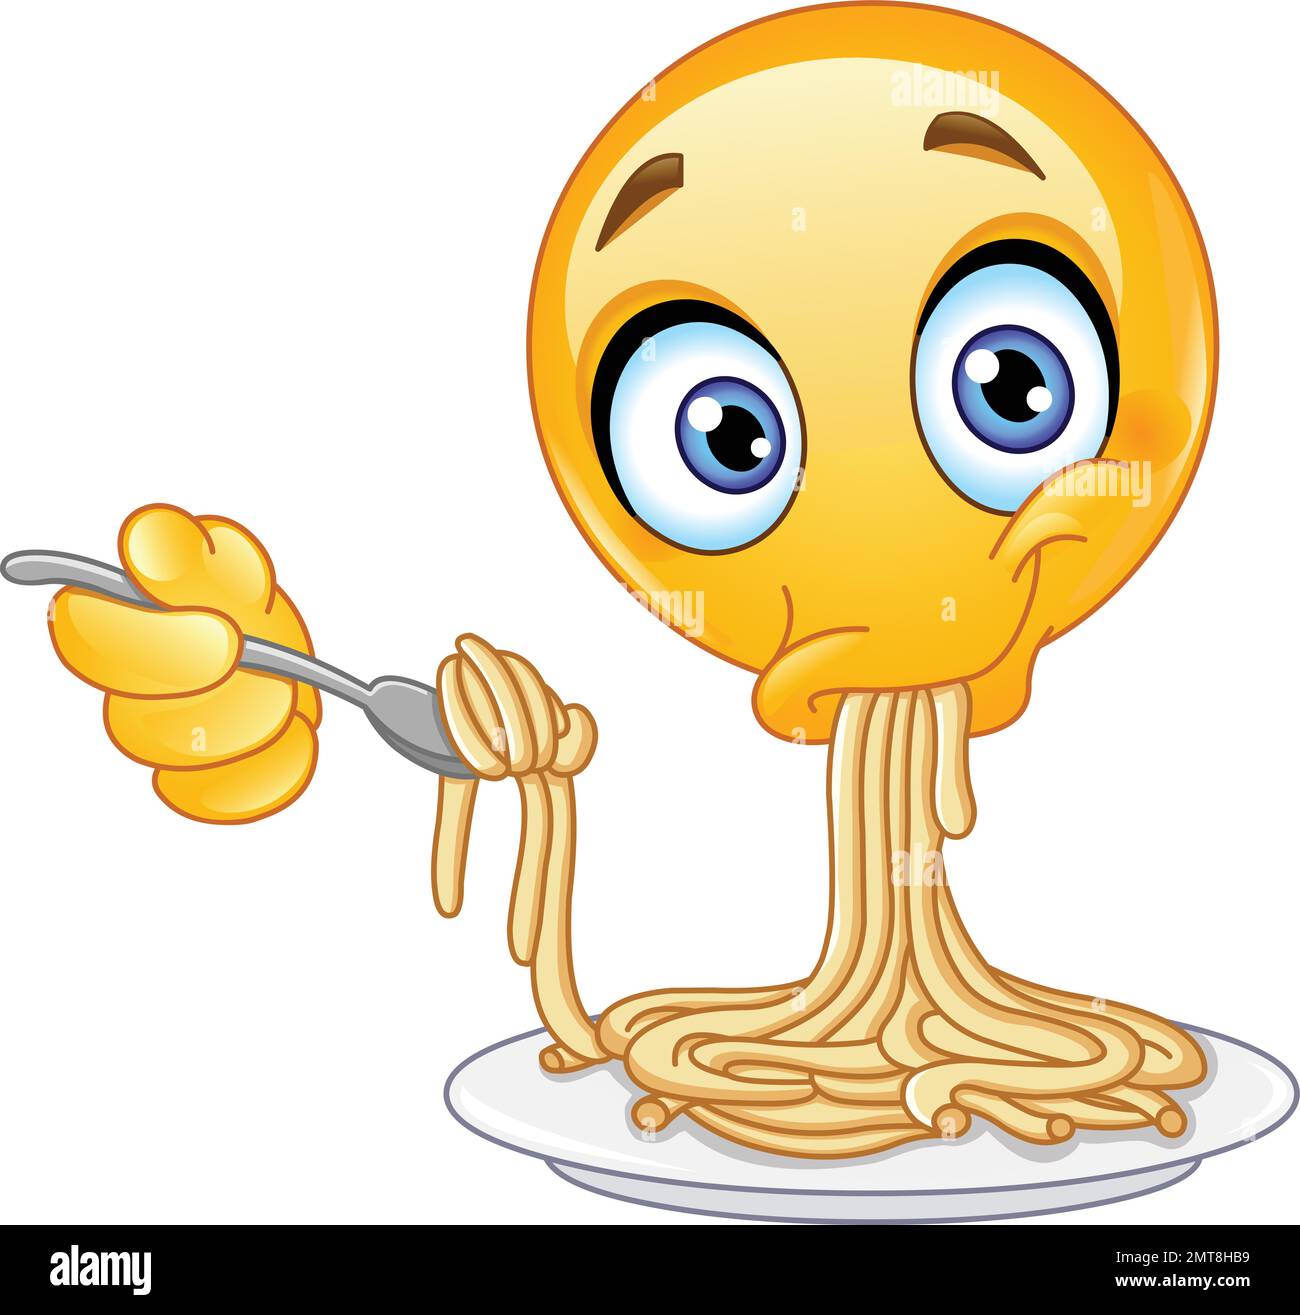 Emoji emoticon eating spaghetti from a plate using a spoon Stock Vector